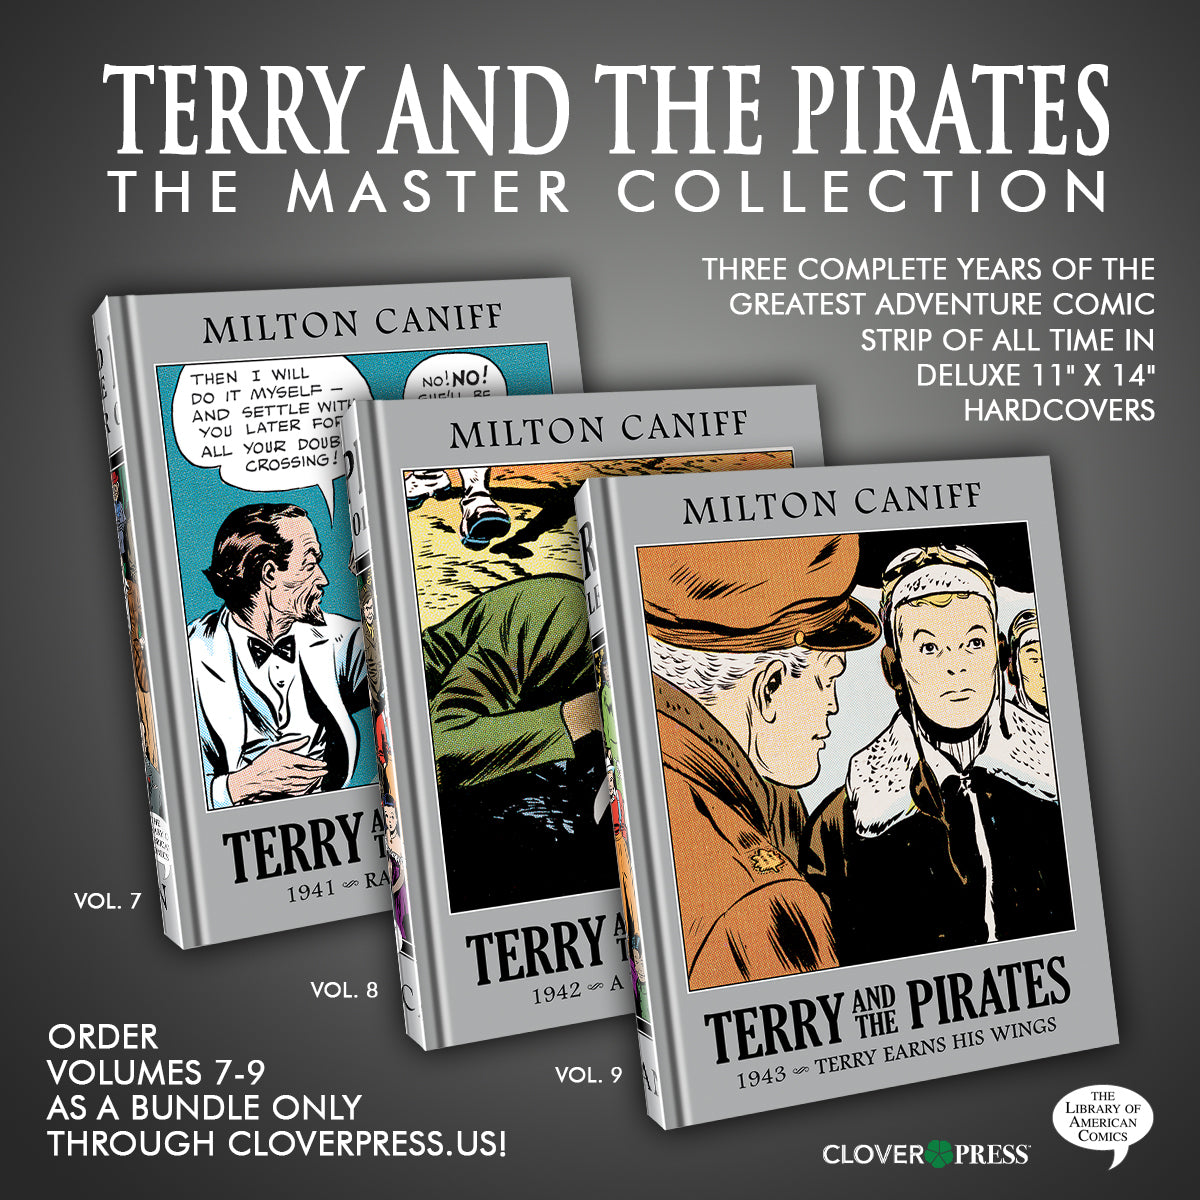 Terry and the Pirates: The Master Collection Volumes 7, 8, 9 BUNDLE